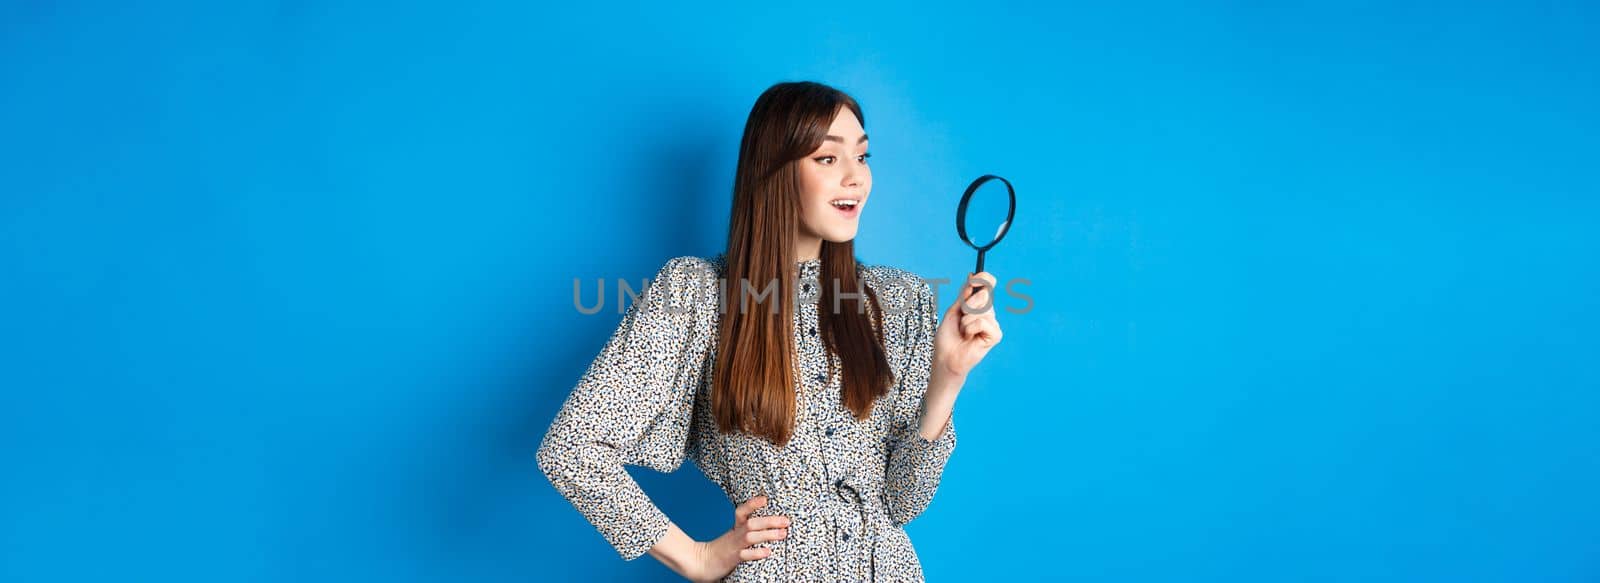 Excited girl looking left with magnifying glass, found interesting promo, investigating or searching, standing on blue background.